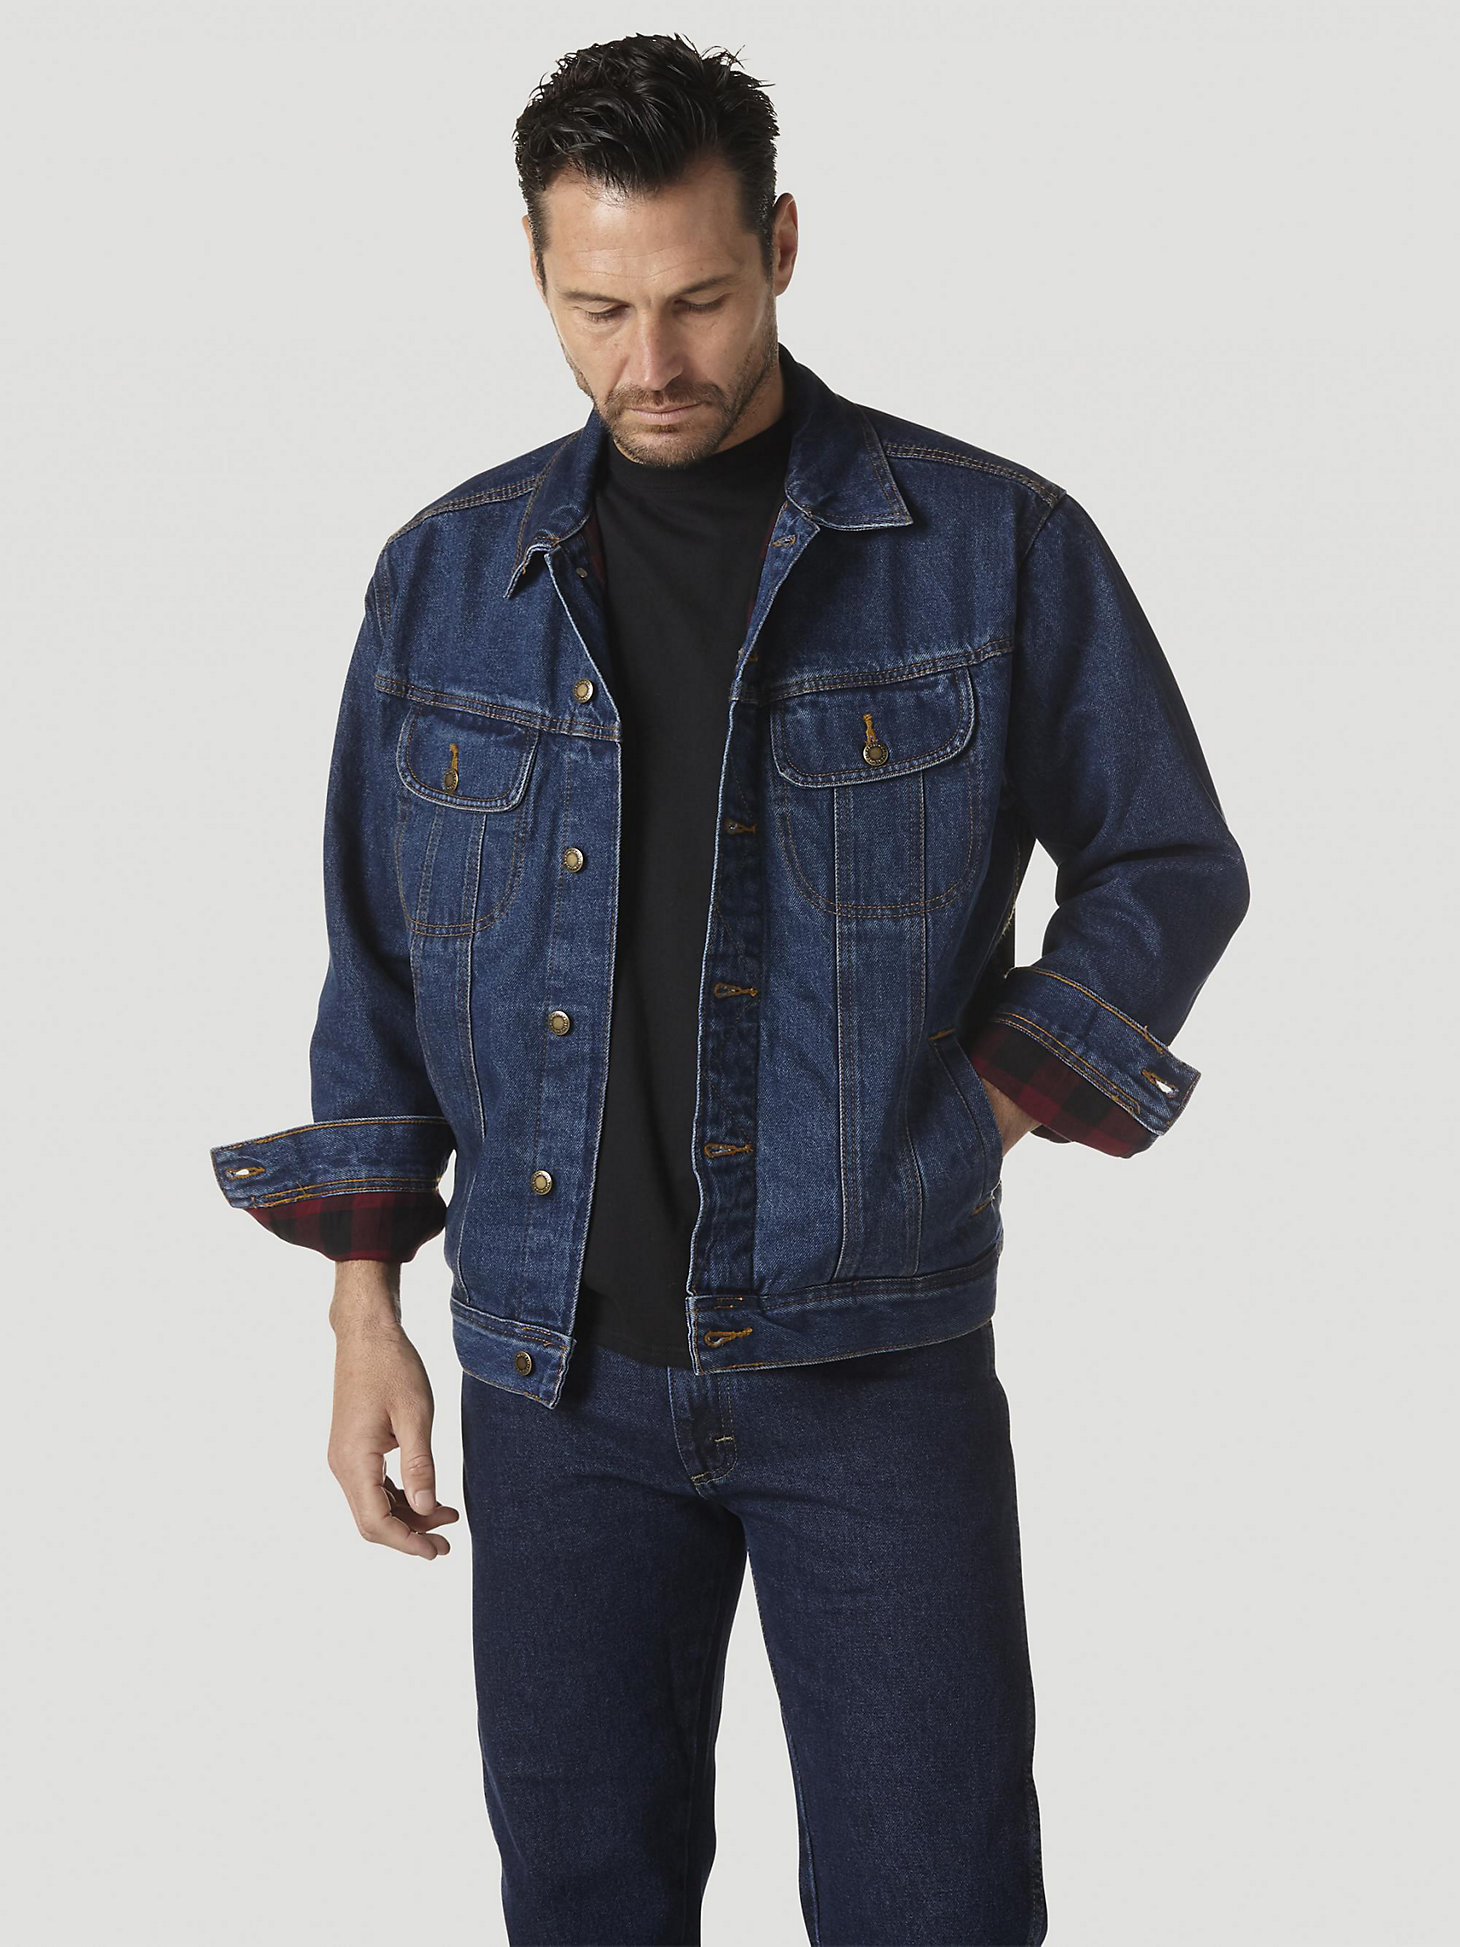 Wrangler Rugged Wear® Flannel Lined Denim Jacket in Antique Navy main view